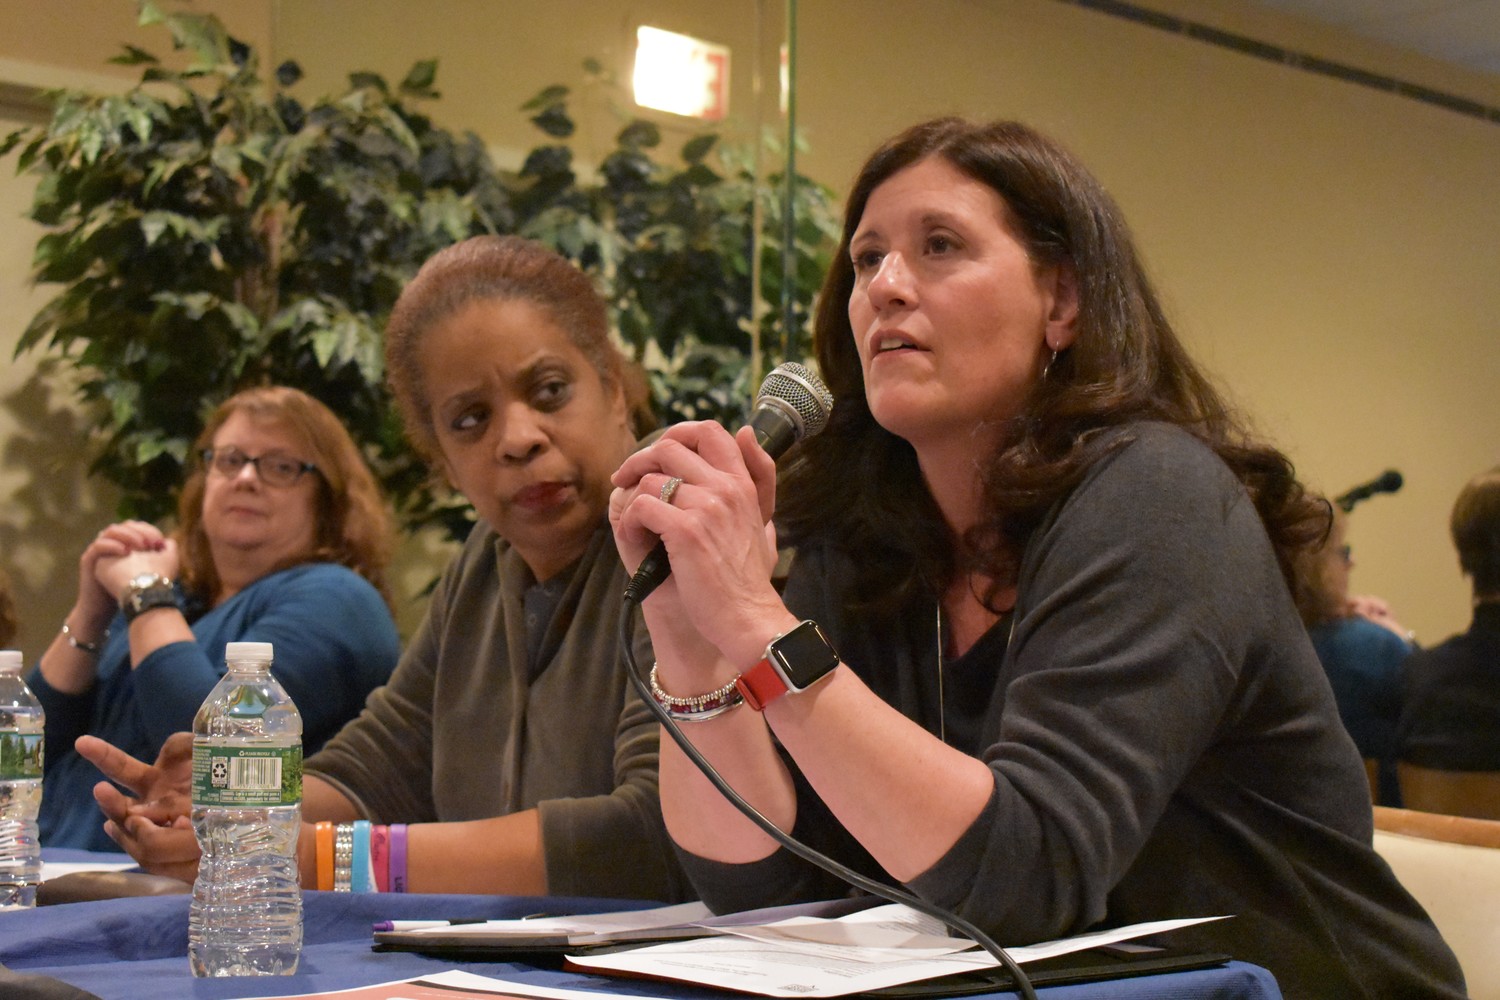 Kathleen Baxley, Rockville Centre’s deputy mayor, discussed how she has made a difference in the community during a “Beyond #MeToo” event hosted by Raising Voices at Central Synagogue-Beth Emeth on Jan. 31.